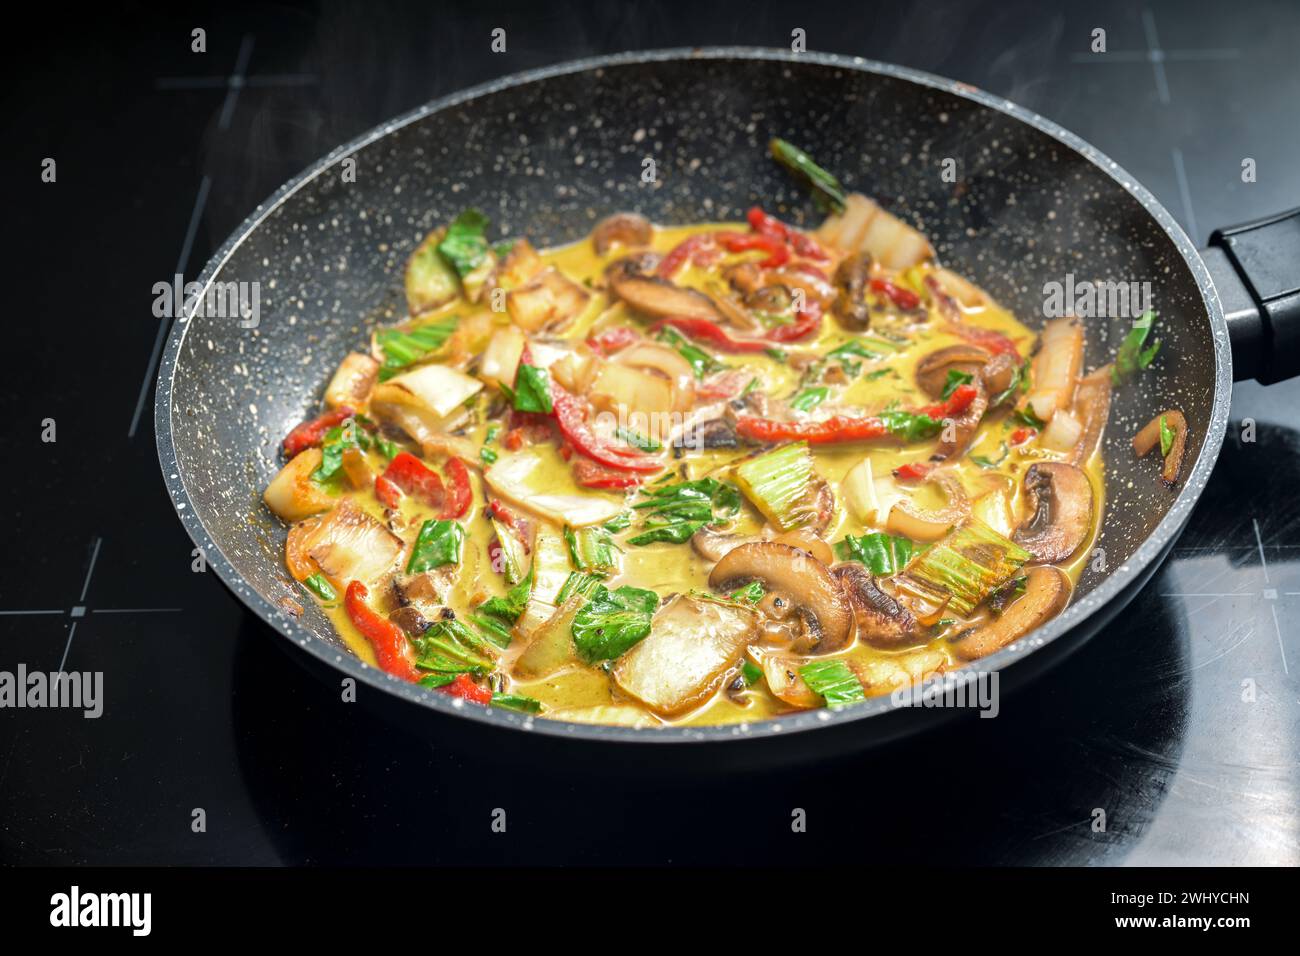 Vegetable Thai curry in a frying pan, ingredients like red bell pepper, mushroom, pak choi, seasoned with ginger, turmeric and o Stock Photo